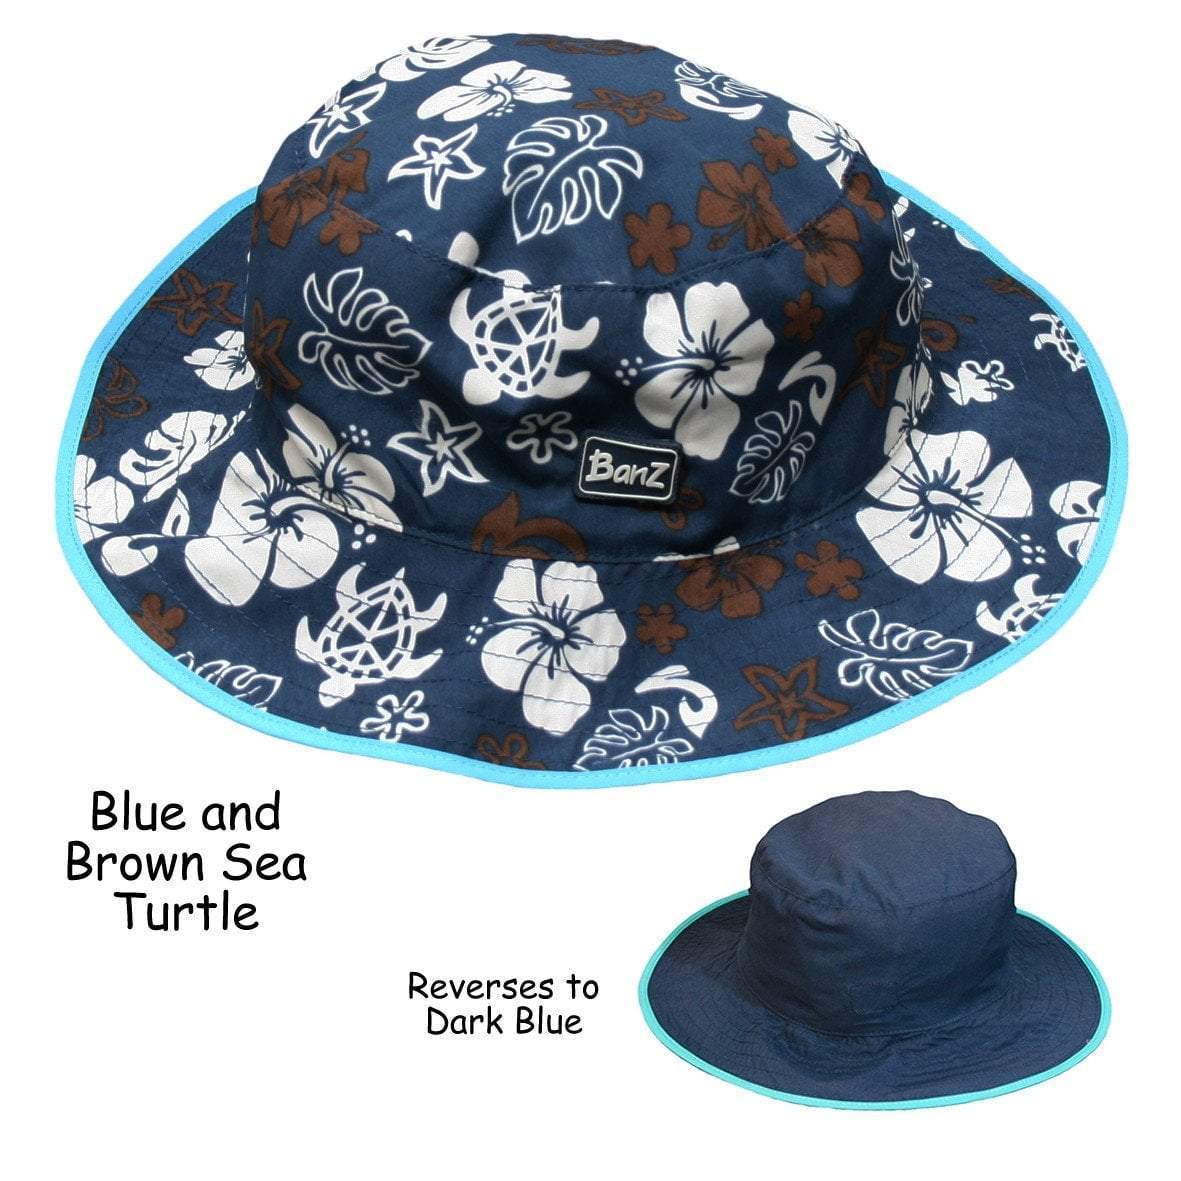 BANZ Sun Hat Baby Reversible Sun Hats (Retiring) Baby 0-24 mo / Blue/Brown Sea Turtle shows printed side and text to call out reverses to dark blue and shows dark blue reverse